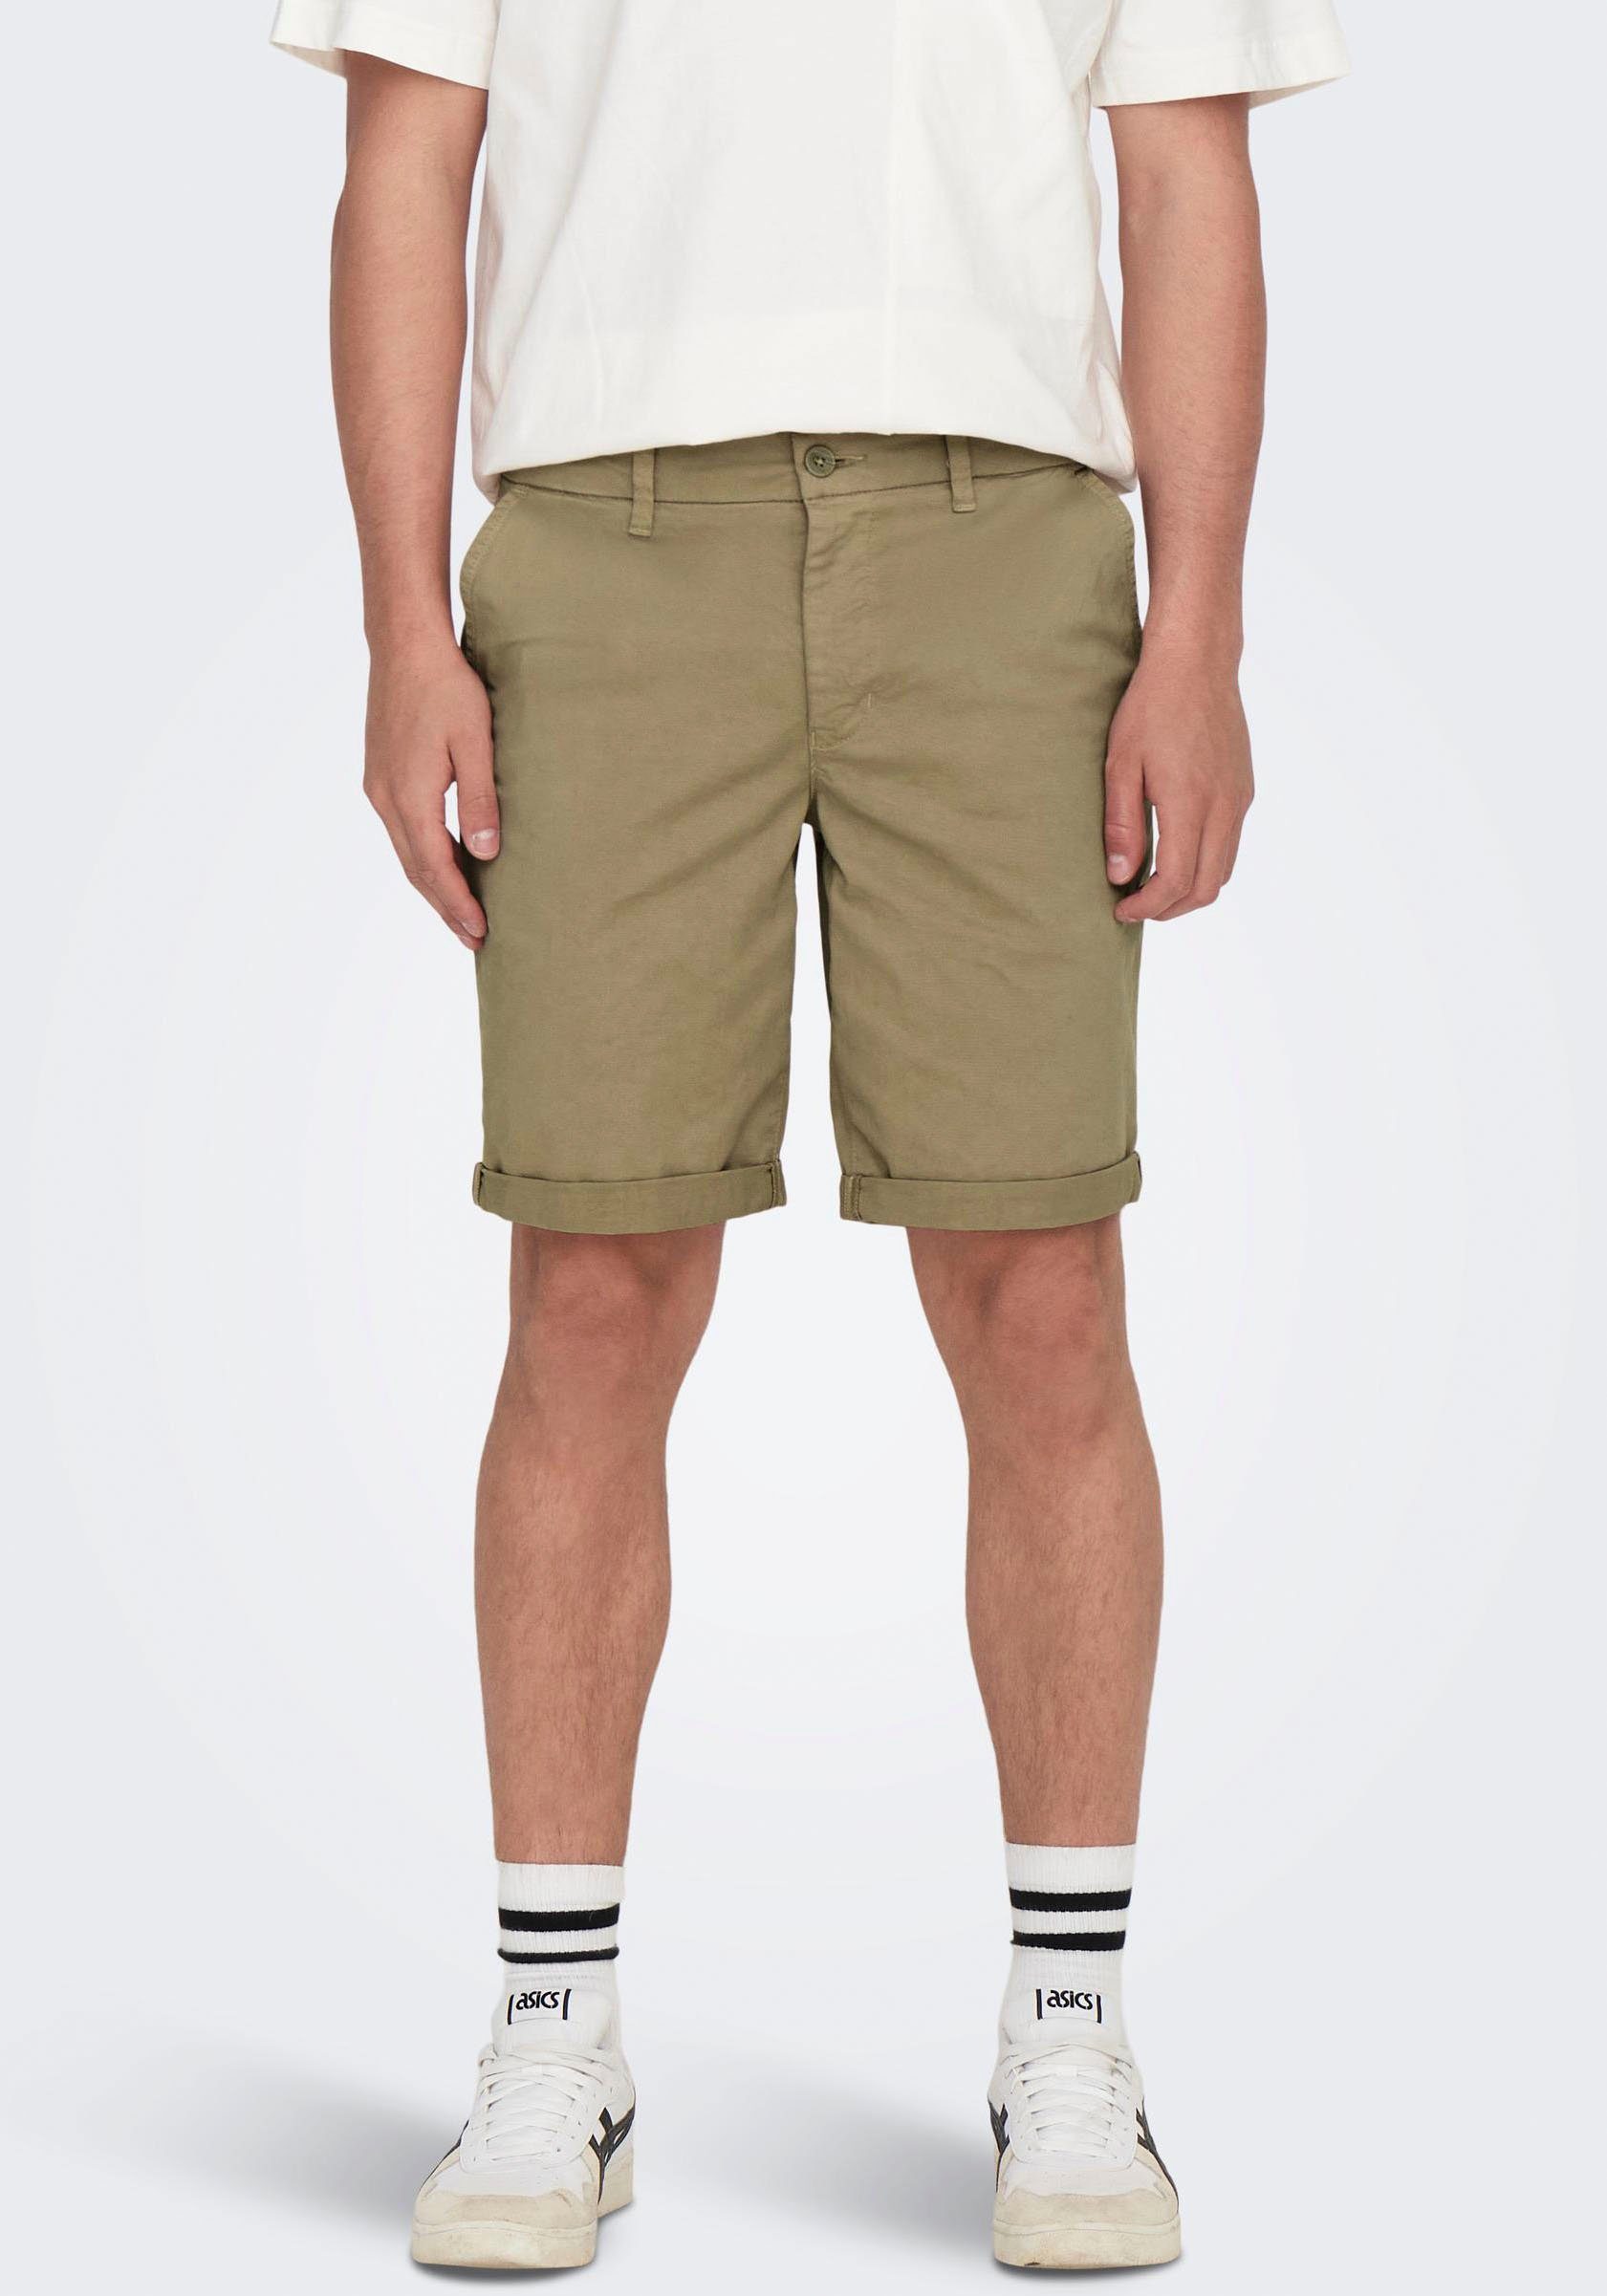 ONLY & SONS Jeansshorts ONSPETER REG TWILL 4481 SHORTS NOOS